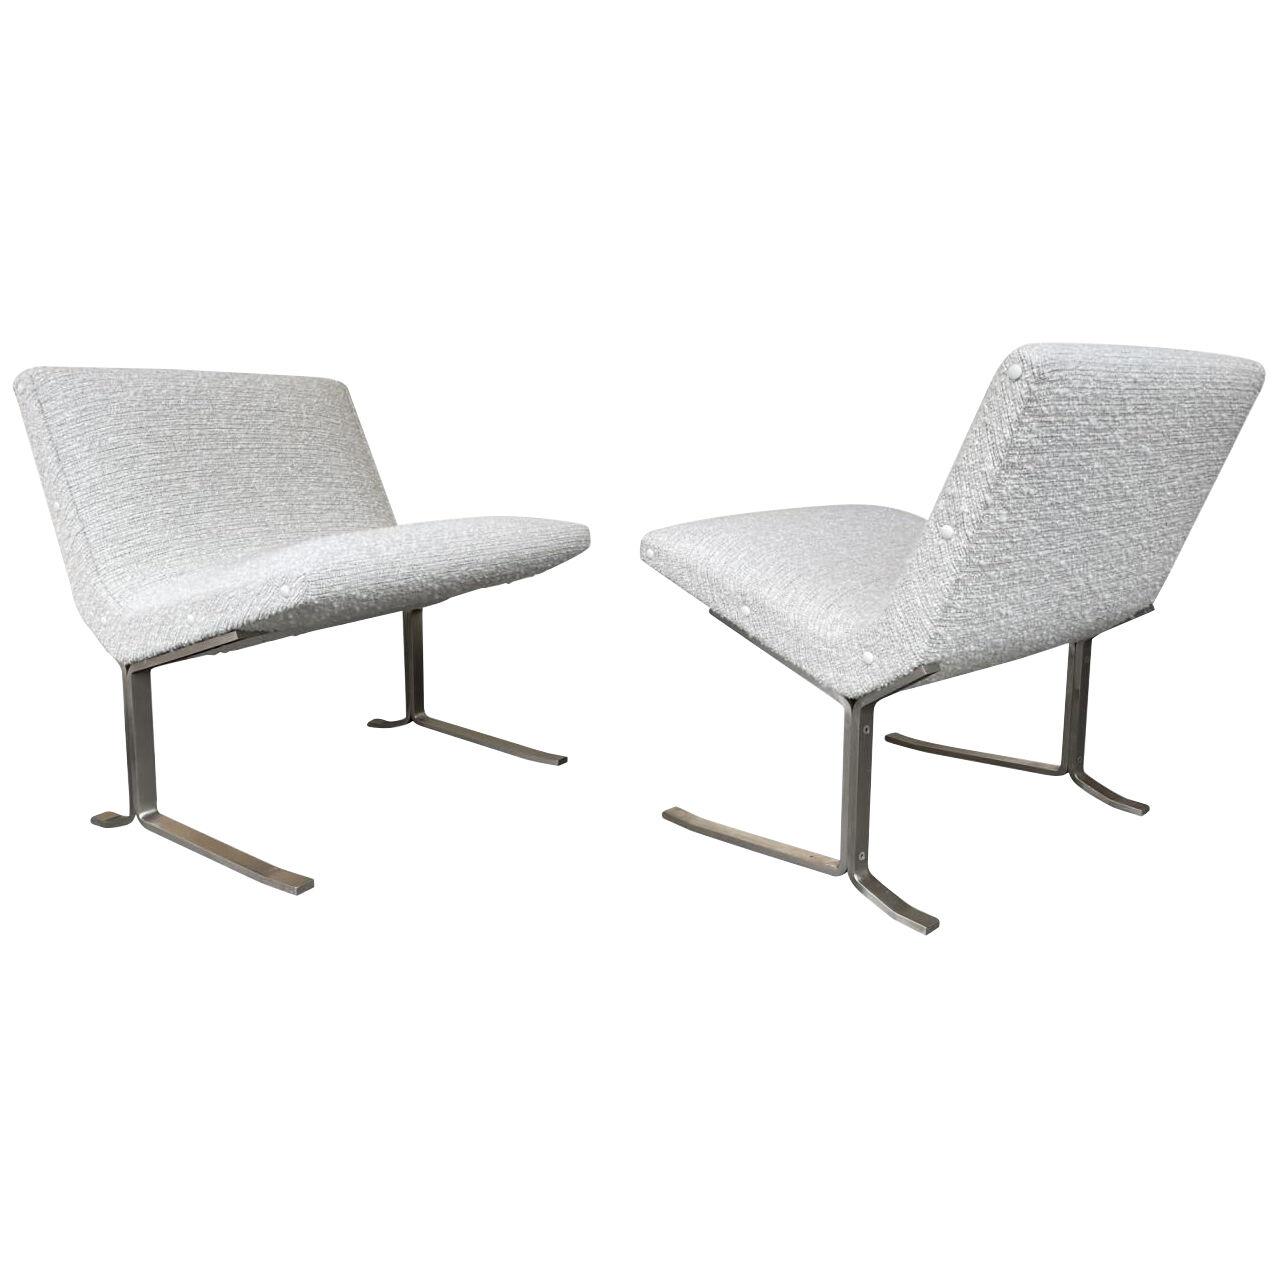 Pair of Slipper Chairs Bouclé Fabric by Formanova. Italy, 1960s